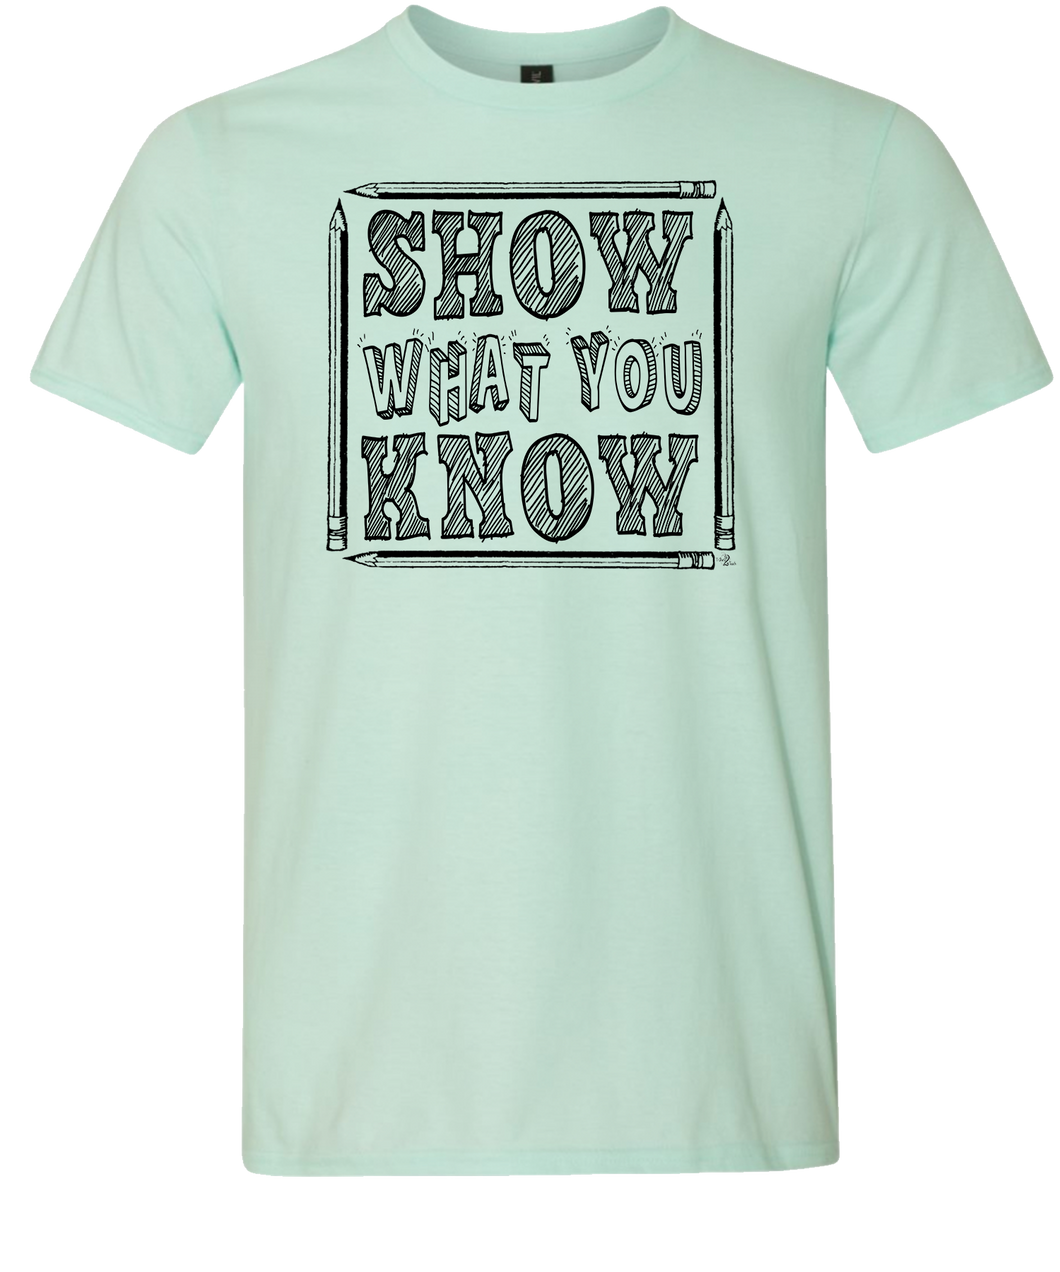 Show What You Know Tee (ONLY Size Small, Medium, Large)